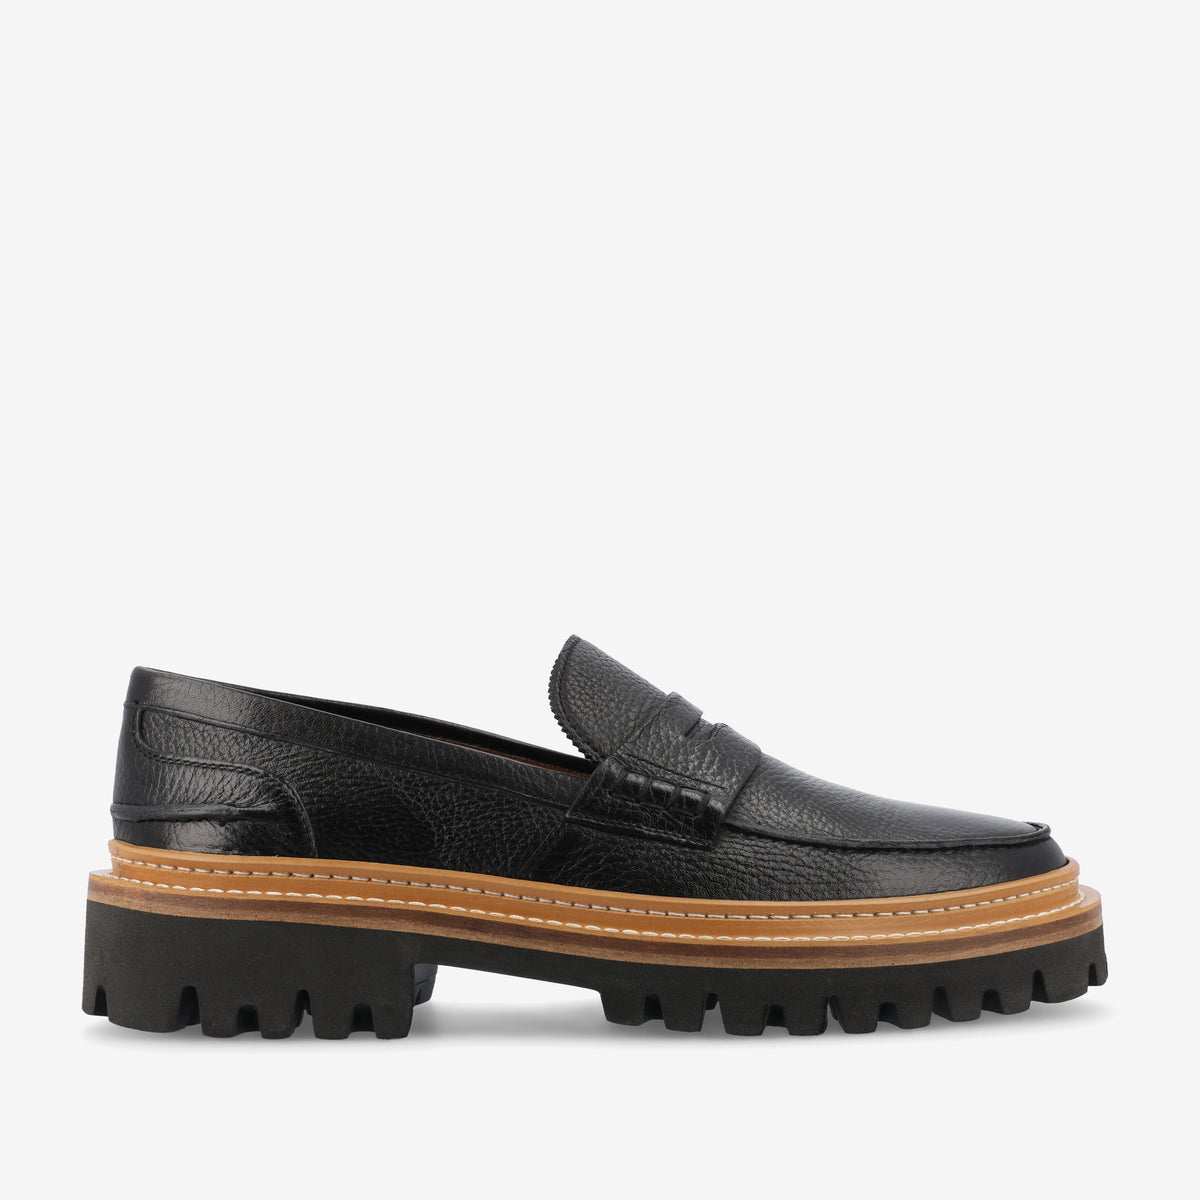 The Country Loafer in Black